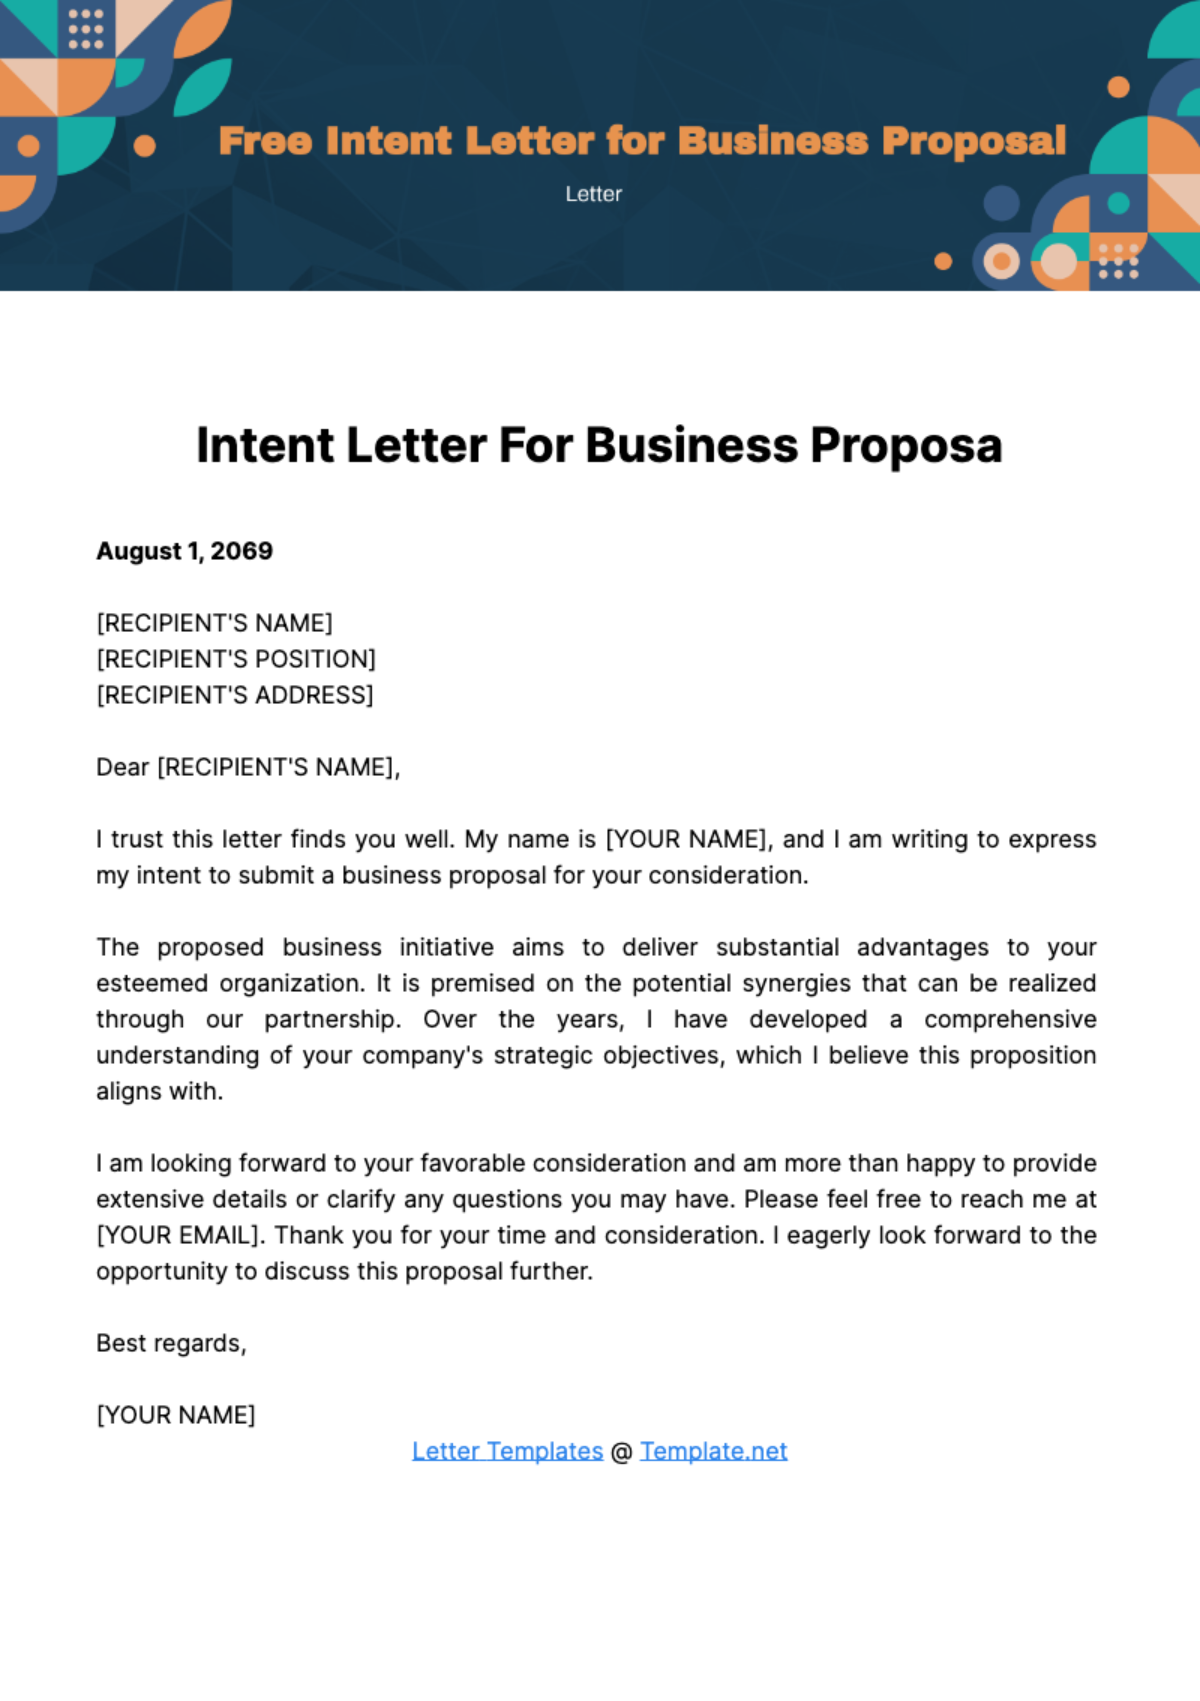 Free Intent Letter for Business Proposal Template